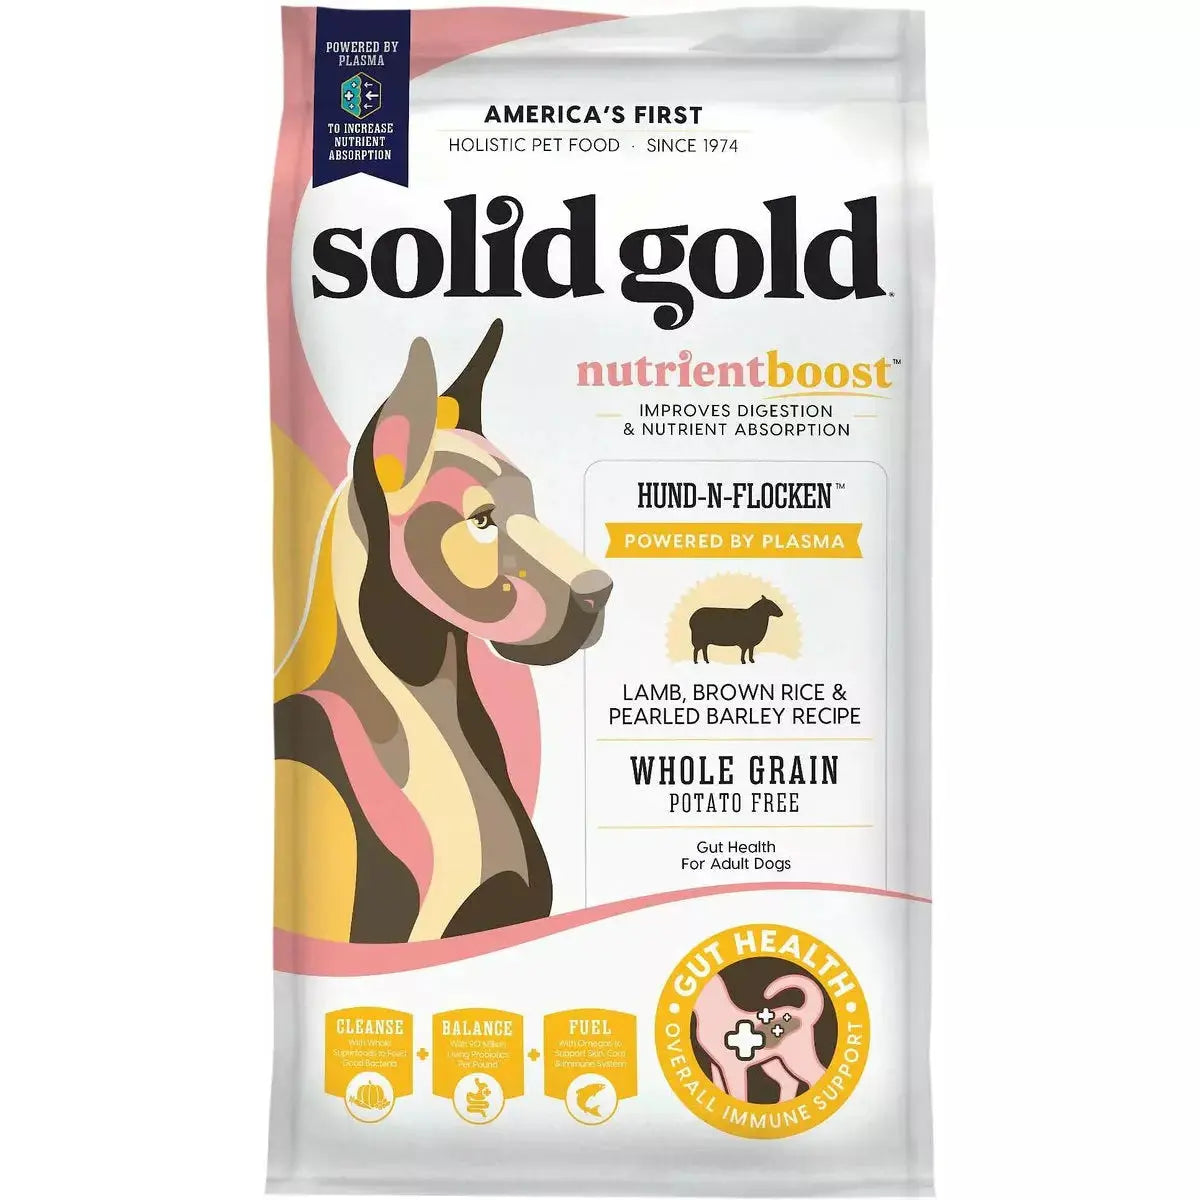 Solid Gold® Hund-N-Flocken Powered by Plasma Lamb, Brown Rice & Pearled Barley Dry Dog Food Solid Gold